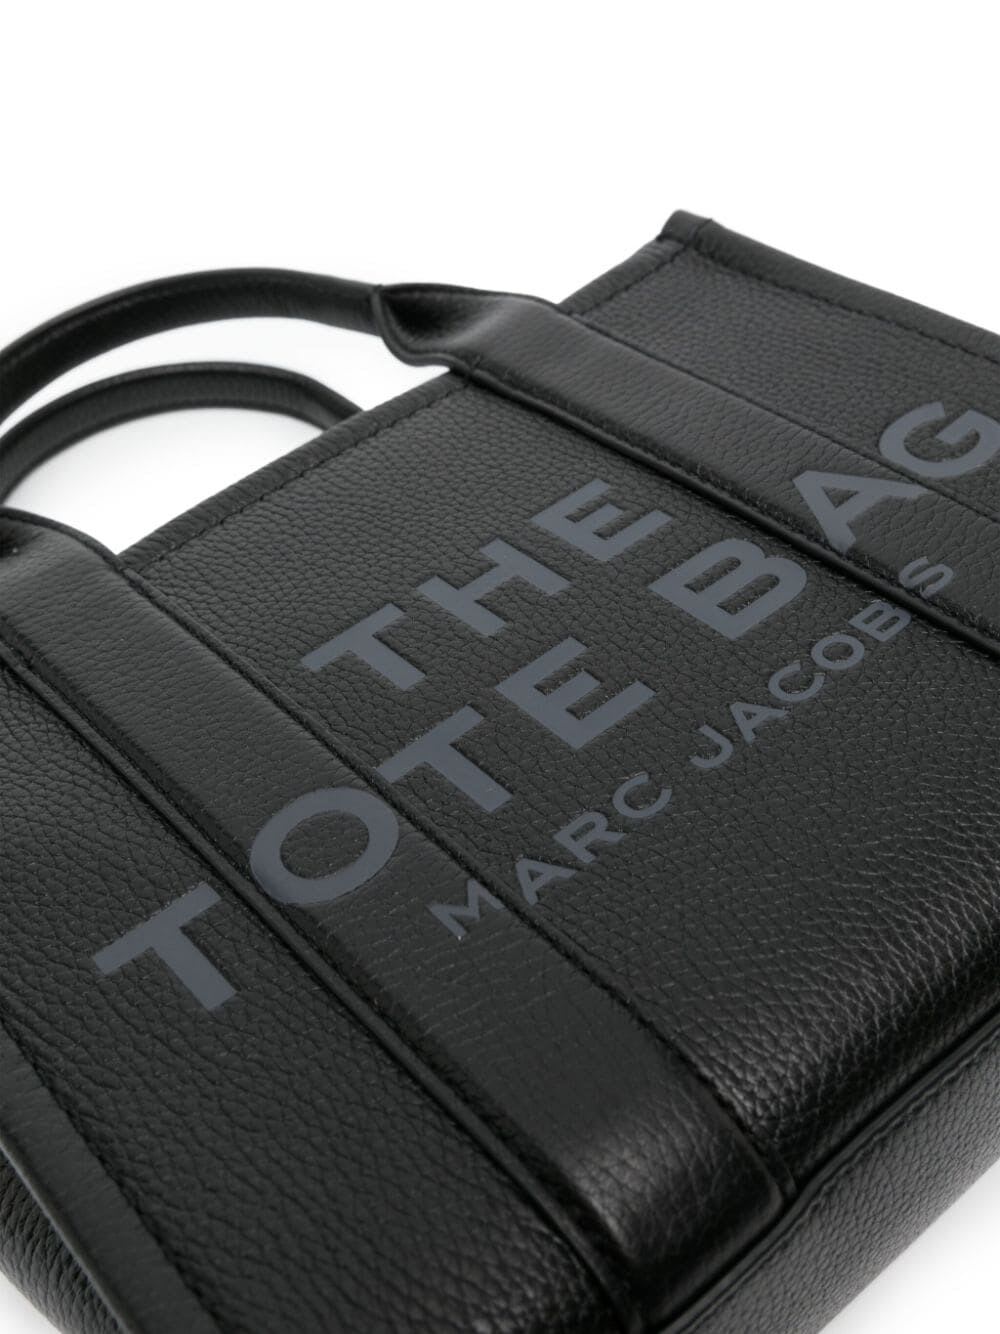 Shop Marc Jacobs The Small Tote In Black